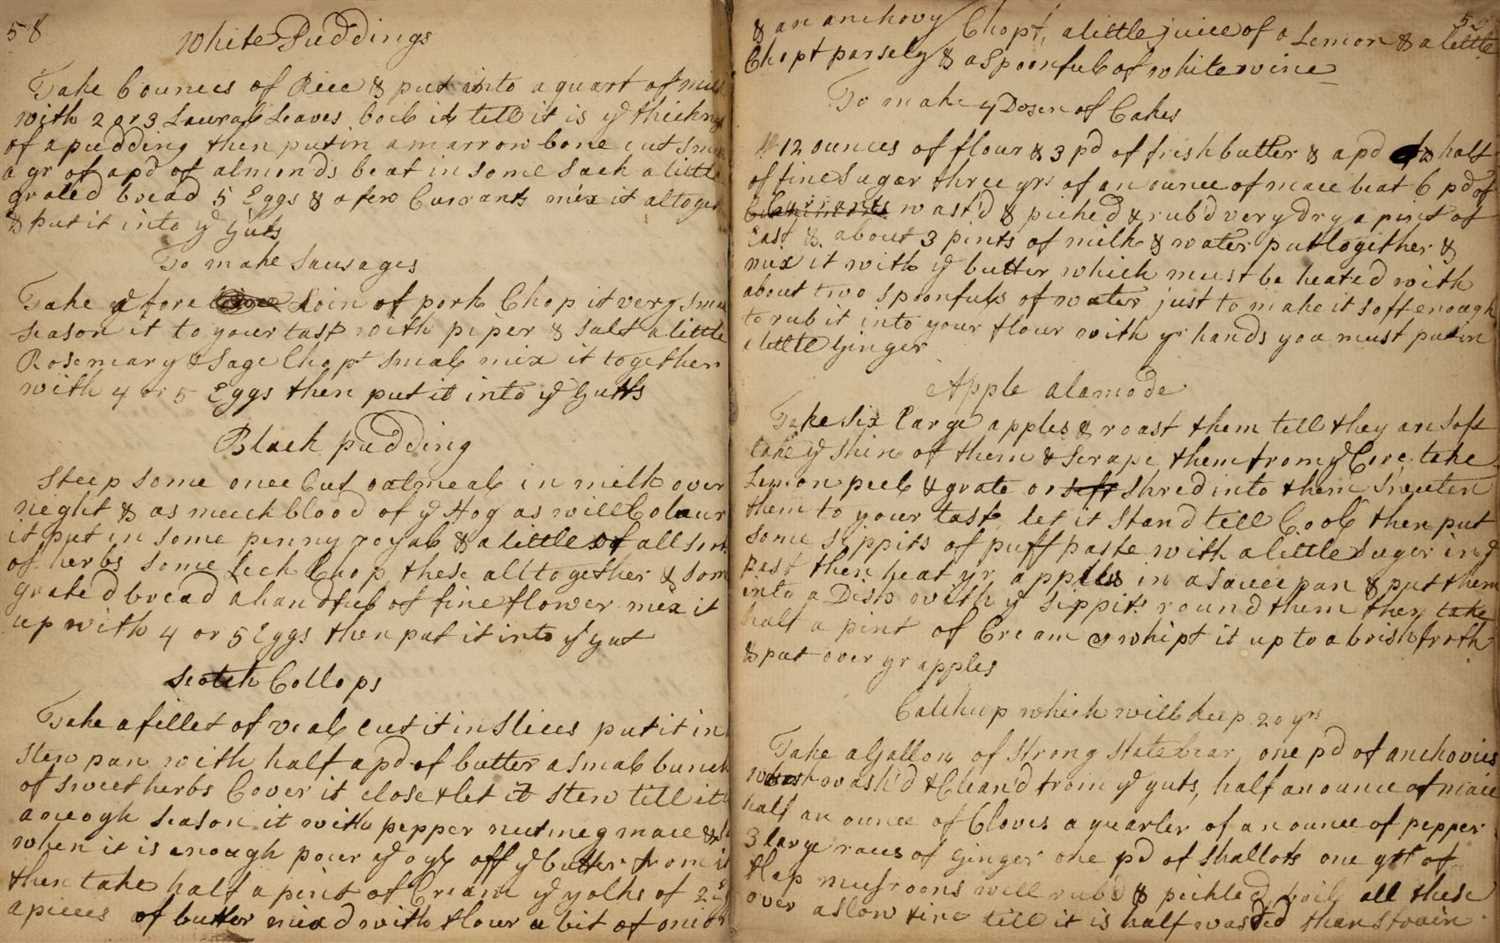 Lot 360 - Cookery. A manuscript receipt book, dated 1730 and 1733